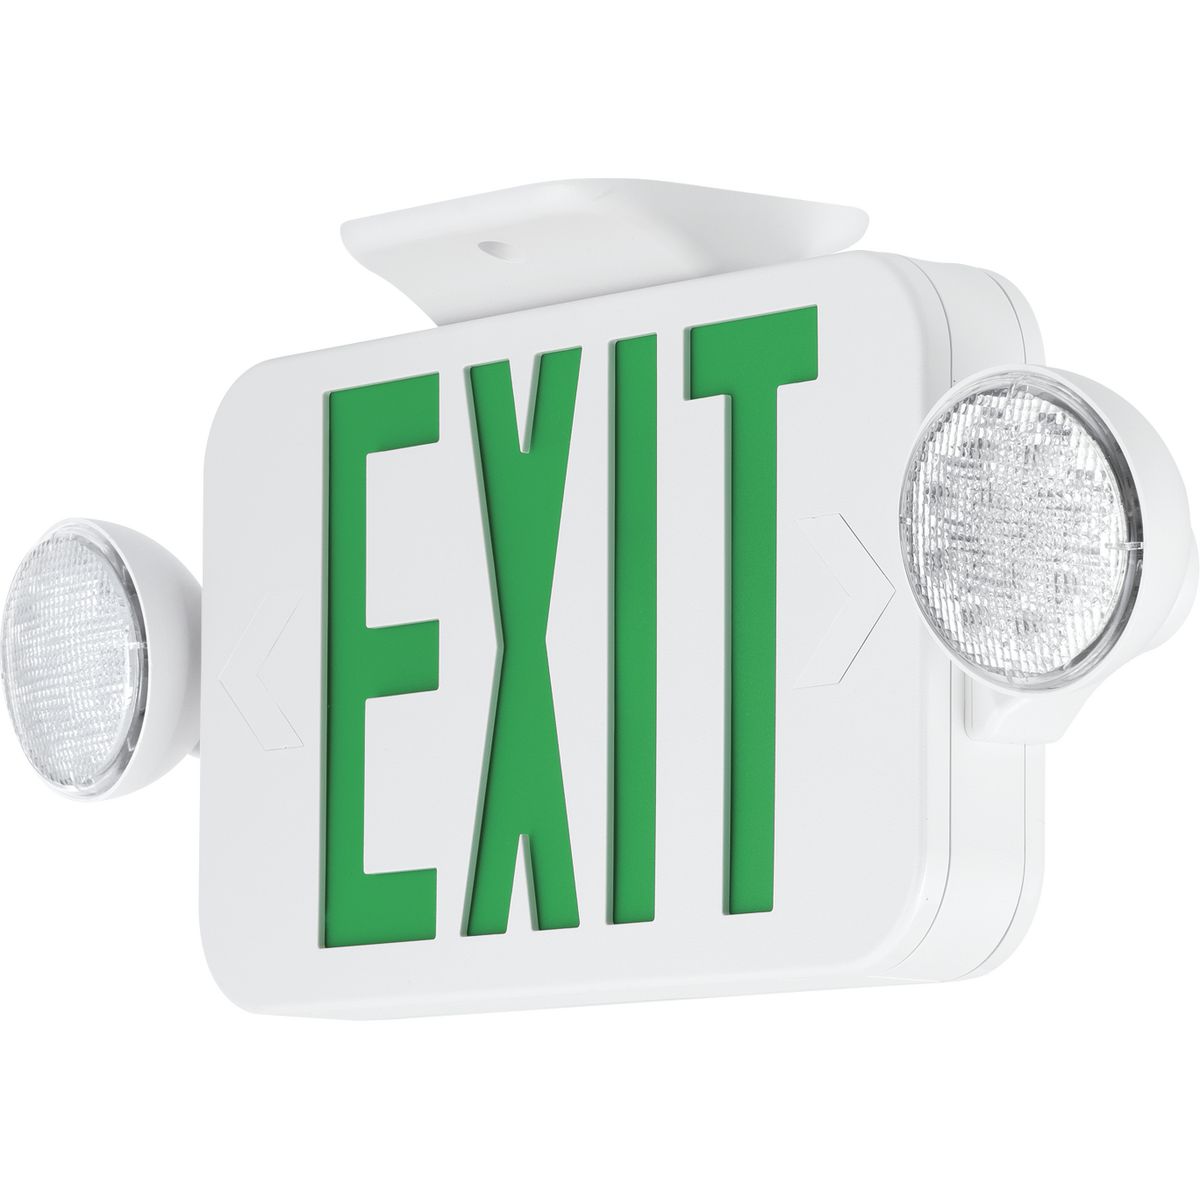 LED Exit Sign Combo, Face style: Universal, Color: White, Number of Lamps: 2, Voltage Rating: Dual-voltage 120 or 277 VAC. The PECUE Series can be applied in stair-wells, hallways, offices and other commercial applications. Green Lettering.